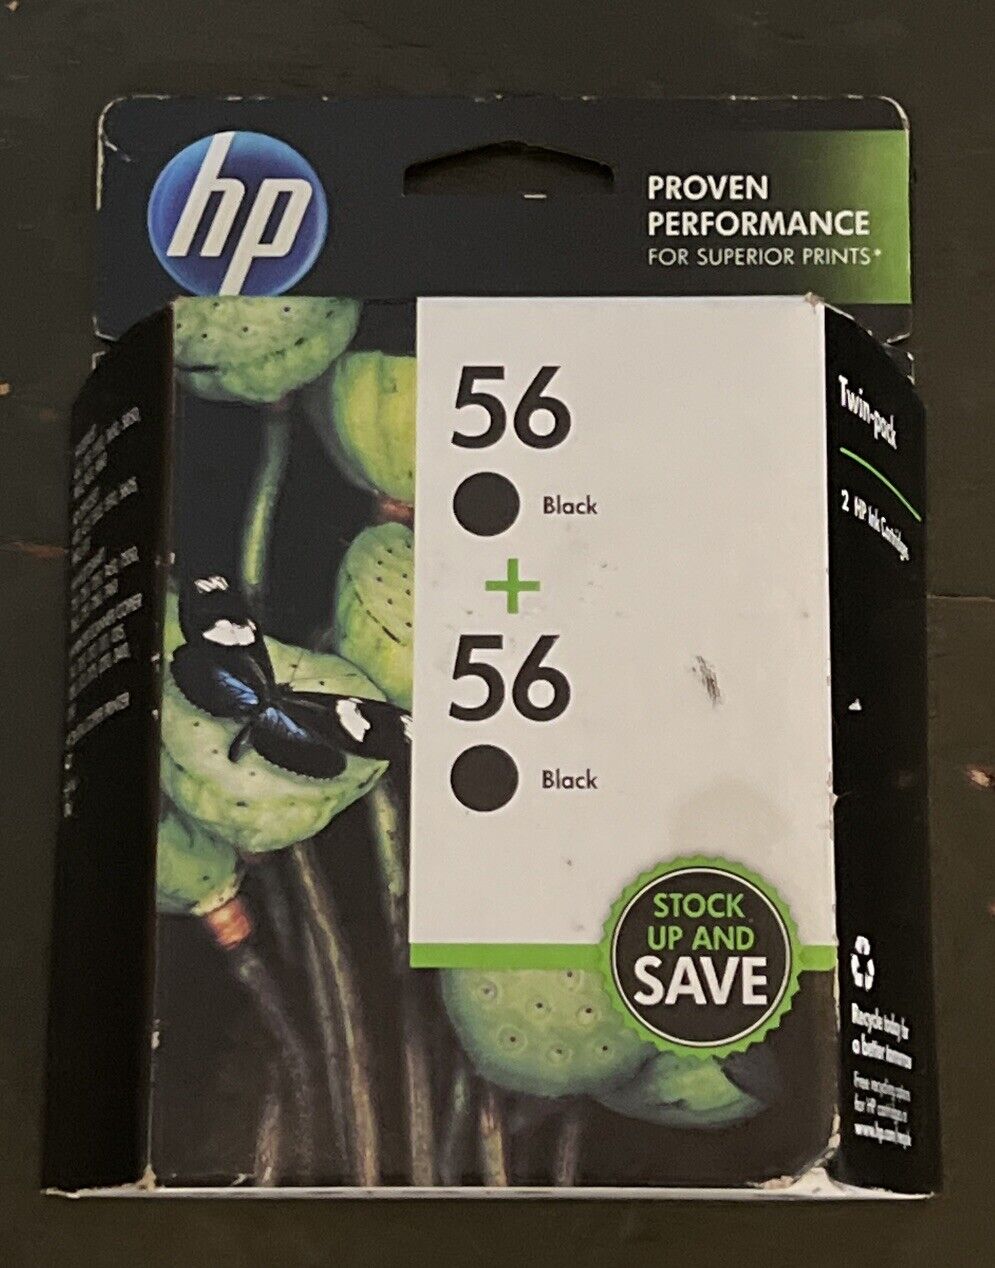 Genuine HP 56 Black Twin Pack NEW Sealed In Box Expired December 2013